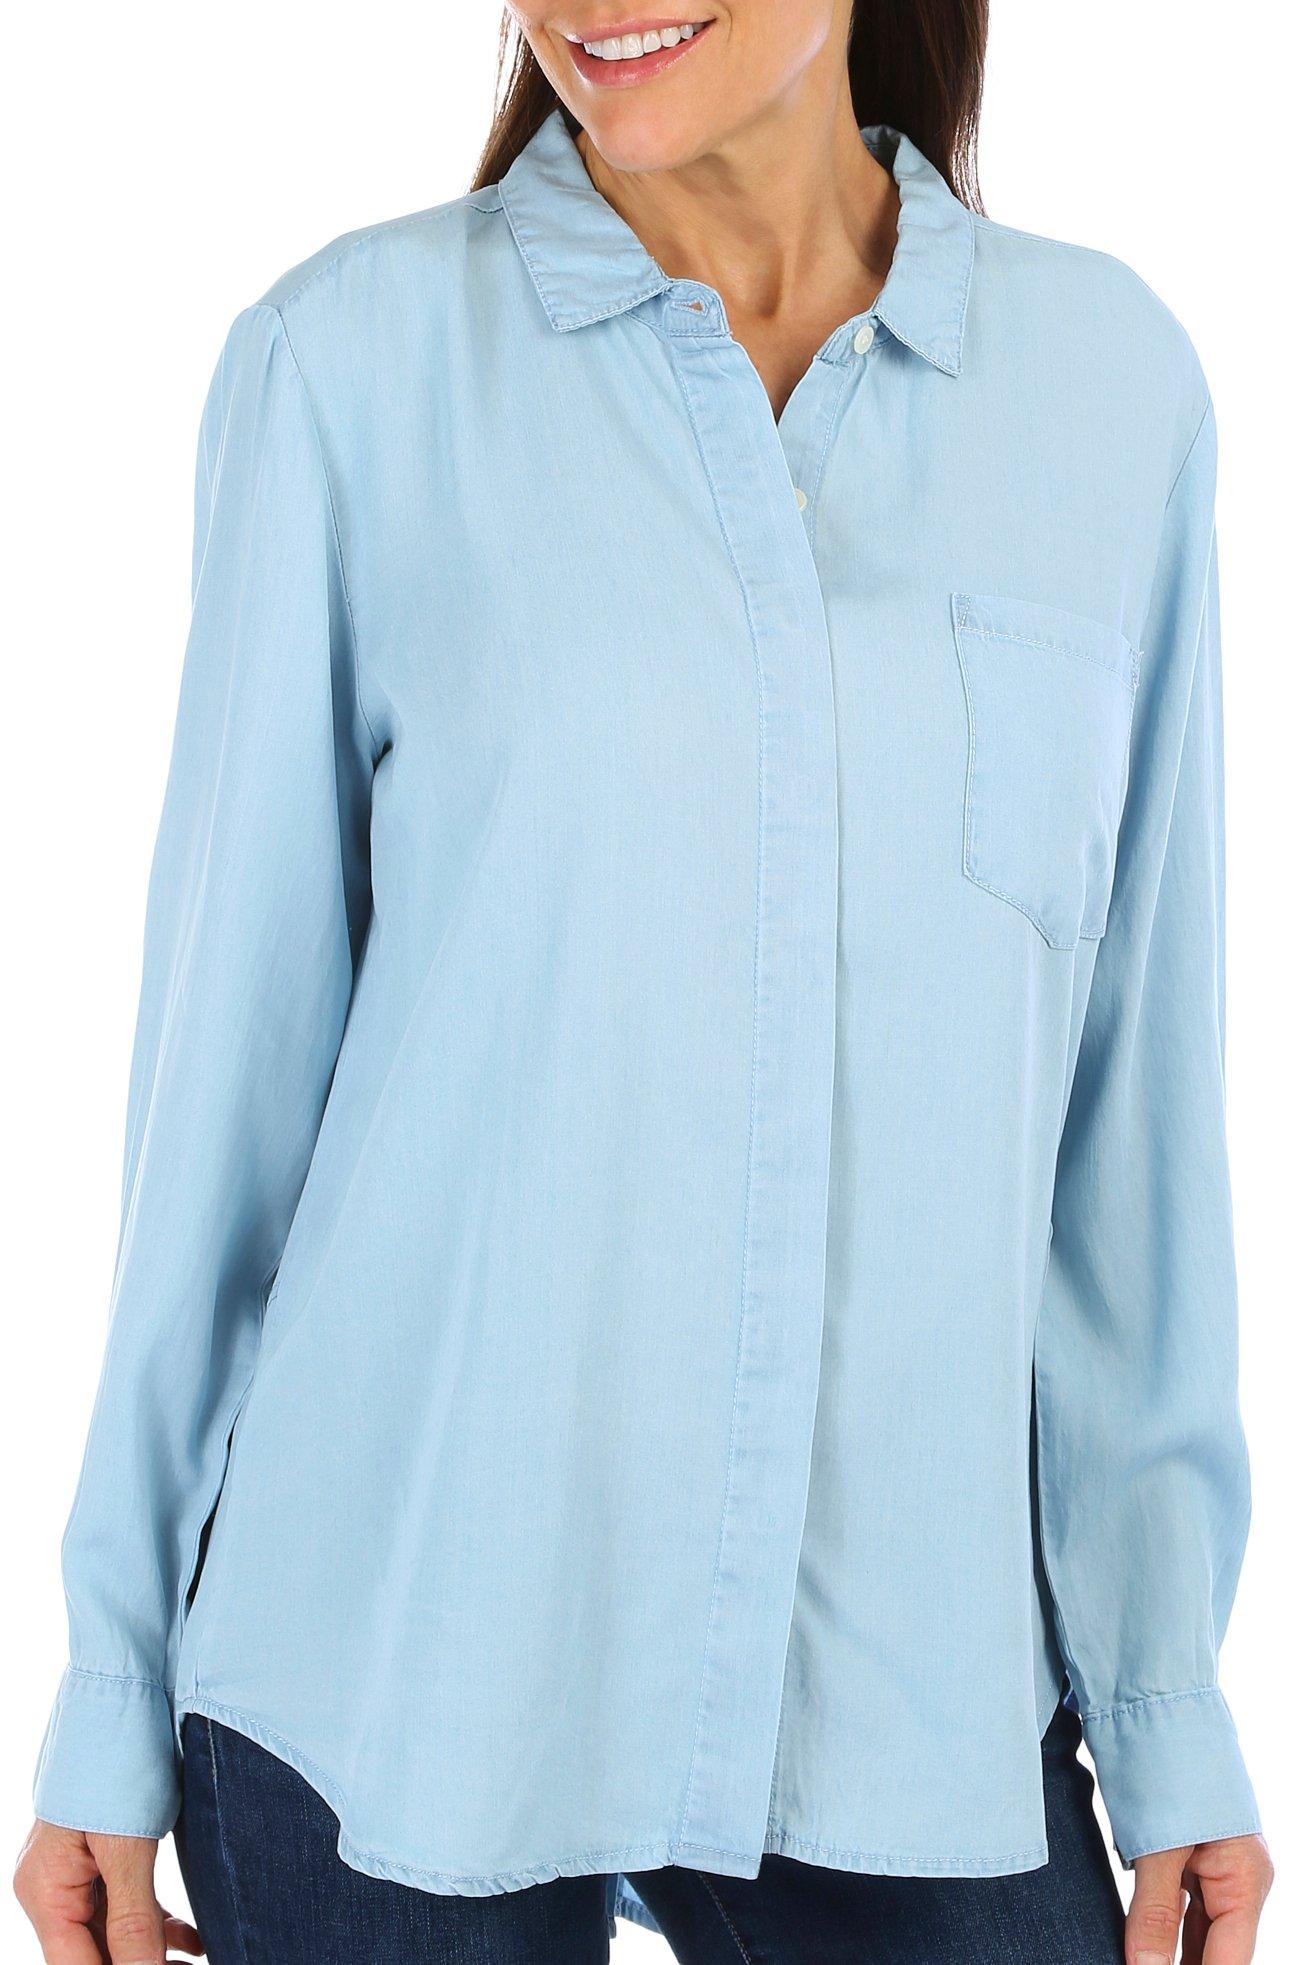 Blue Sol Womens Solid Button Down Long Sleeve